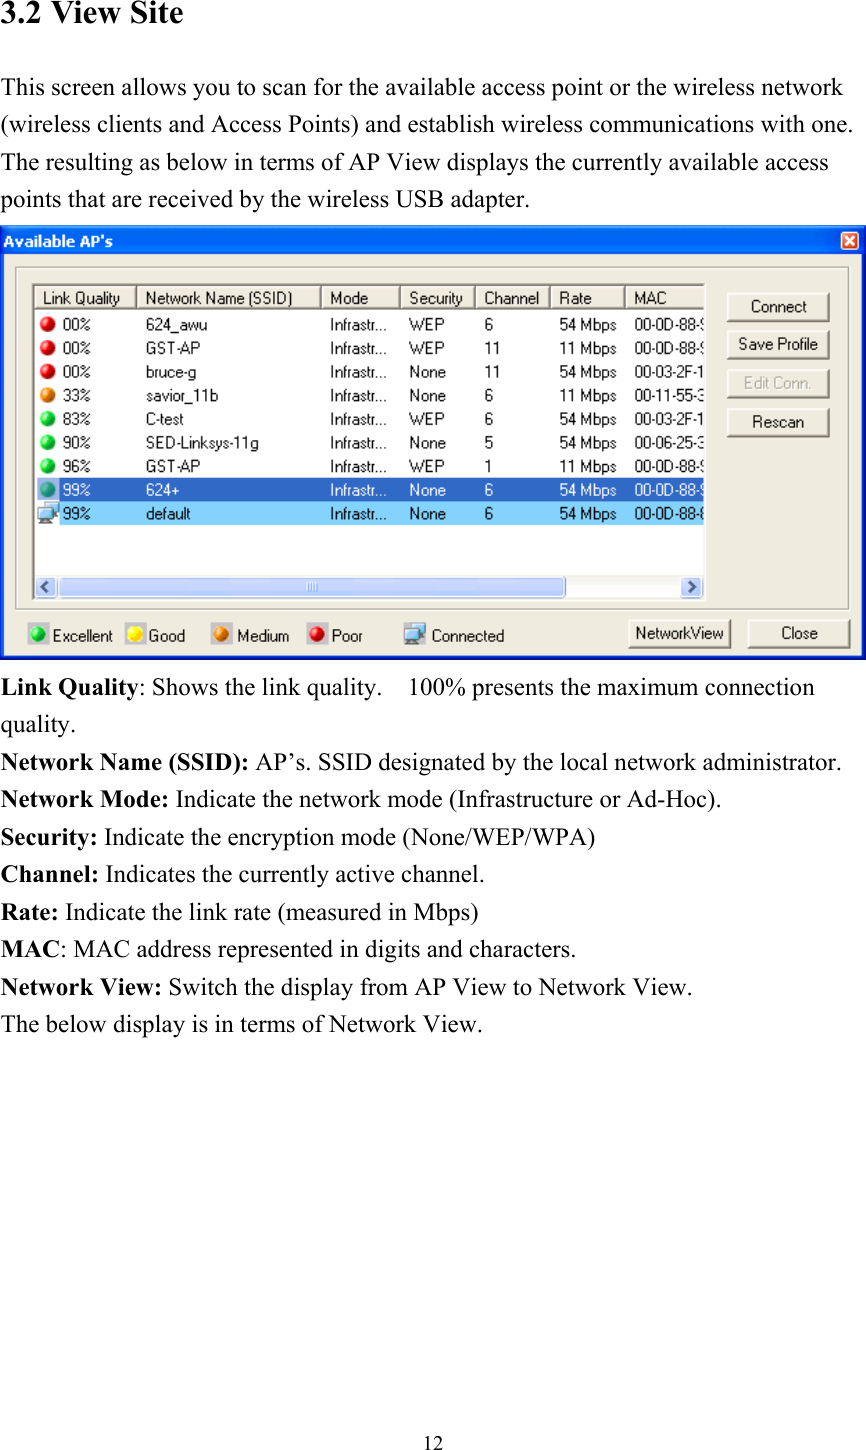 3.2 View Site   This screen allows you to scan for the available access point or the wireless network (wireless clients and Access Points) and establish wireless communications with one.   The resulting as below in terms of AP View displays the currently available access points that are received by the wireless USB adapter.    Link Quality: Shows the link quality.    100% presents the maximum connection quality. Network Name (SSID): AP’s. SSID designated by the local network administrator. Network Mode: Indicate the network mode (Infrastructure or Ad-Hoc). Security: Indicate the encryption mode (None/WEP/WPA) Channel: Indicates the currently active channel. Rate: Indicate the link rate (measured in Mbps) MAC: MAC address represented in digits and characters.   Network View: Switch the display from AP View to Network View. The below display is in terms of Network View.  12